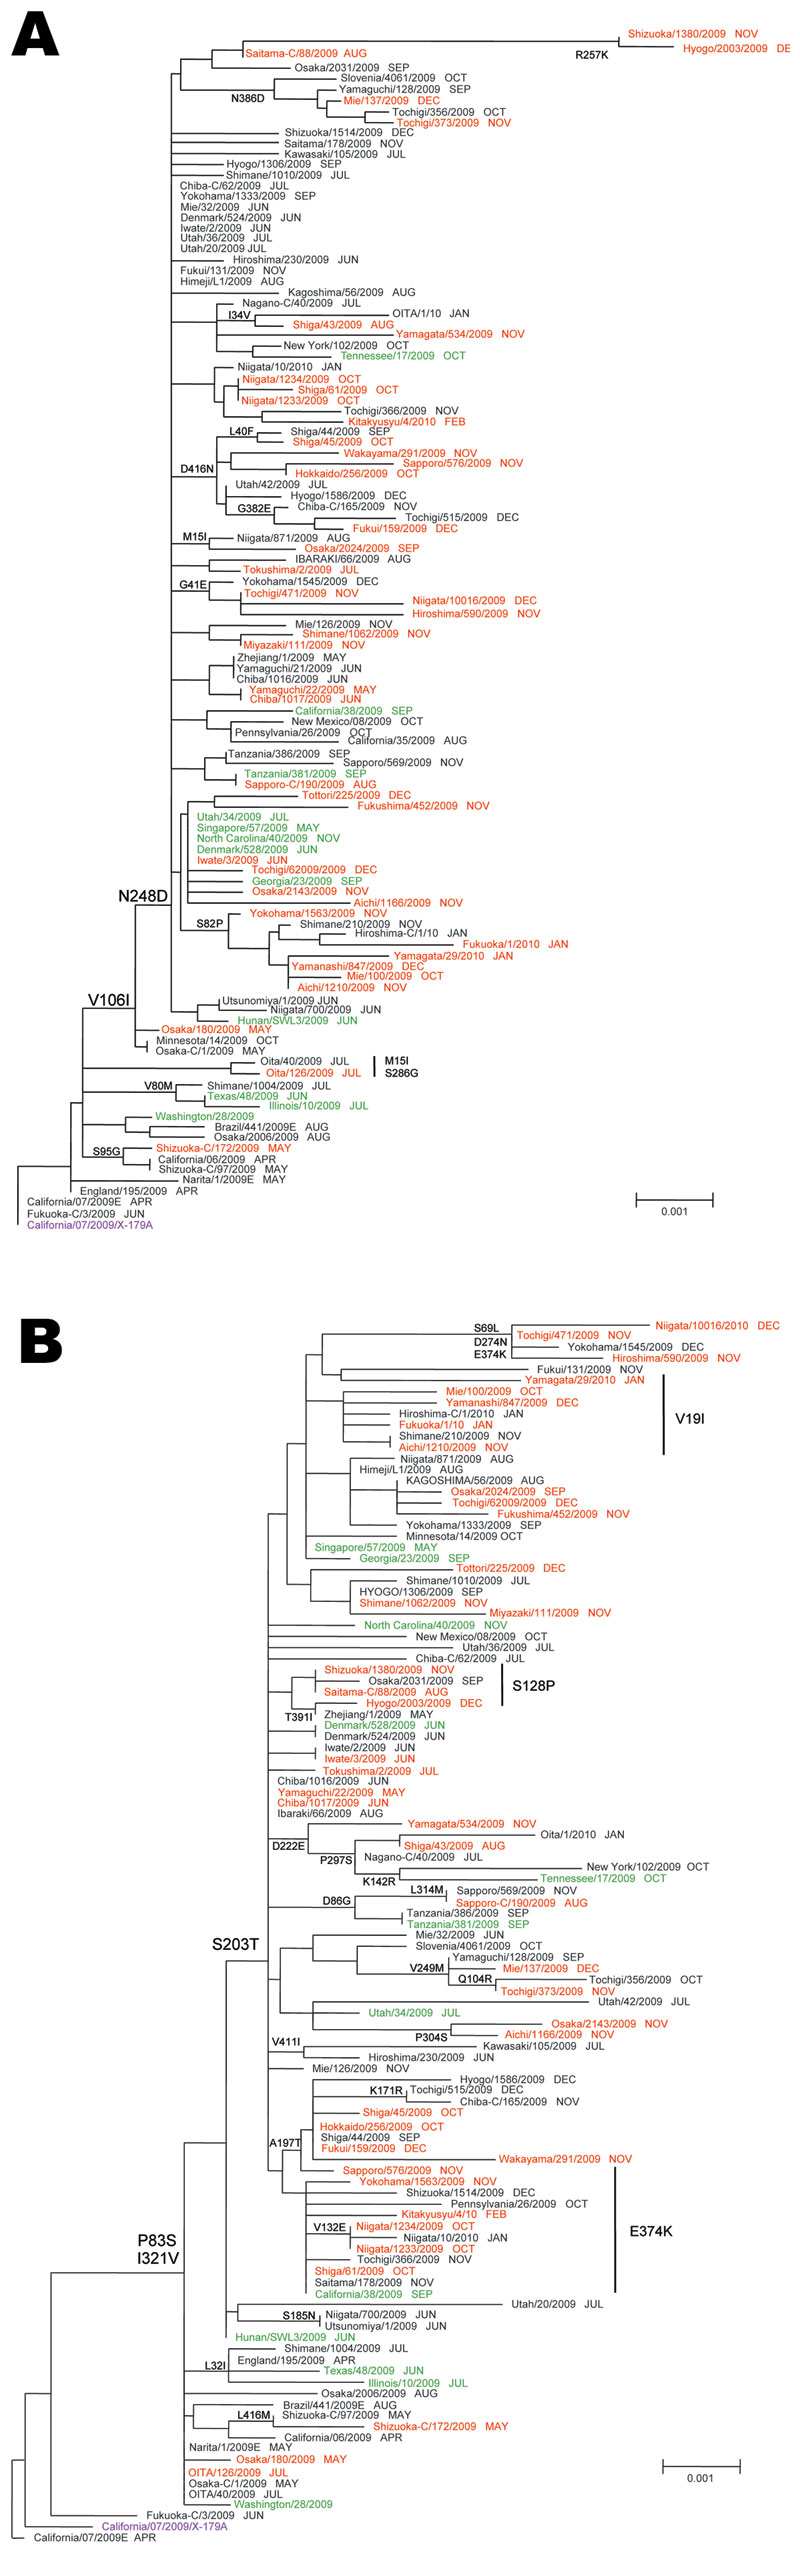 Phylogenetic analysis of influenza pandemic (H1N1) 2009 viruses neuraminidase (NA) (A) and hemagglutinin (HA) genes (B). Most pandemic (H1N1) 2009 viruses possessed the amino acid substitutions S203T in HA and V106I and N248D in NA. Red, oseltamivir-resistant pandemic (H1N1) 2009 from Japan; green, oseltamivir-resistant pandemic (H1N1) 2009 from outside Japan; black, oseltamivir-susceptible (OS) pandemic (H1N1) 2009; purple, 2009–10 current vaccine strains. The sampling month of each isolate is